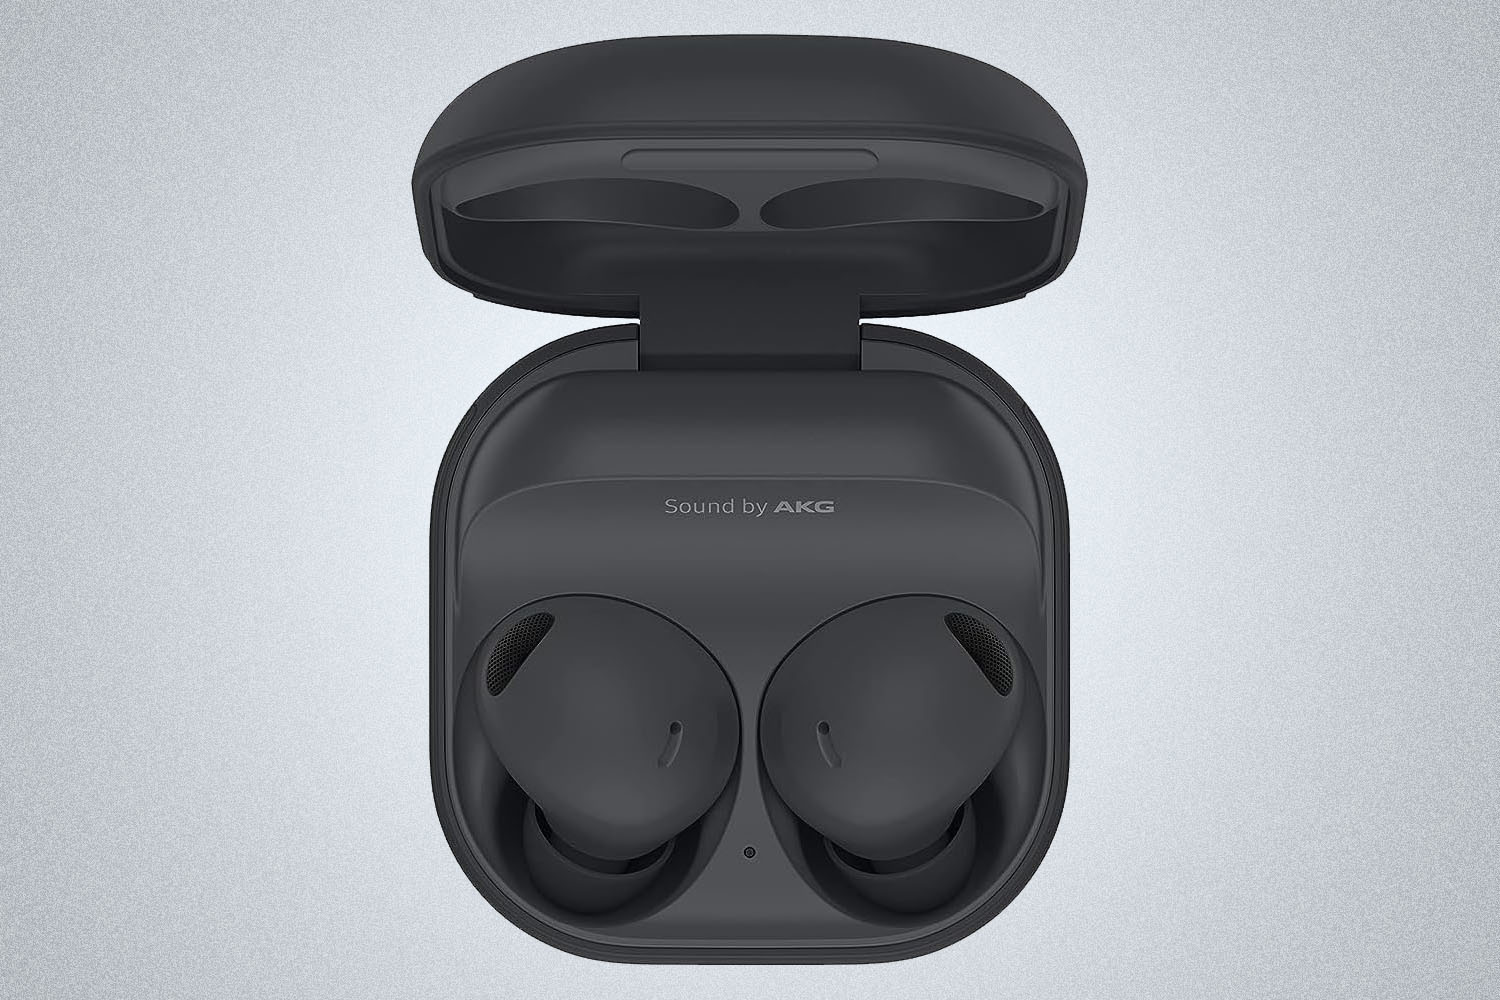 Best for Android: Samsung Galaxy Buds2 Pro